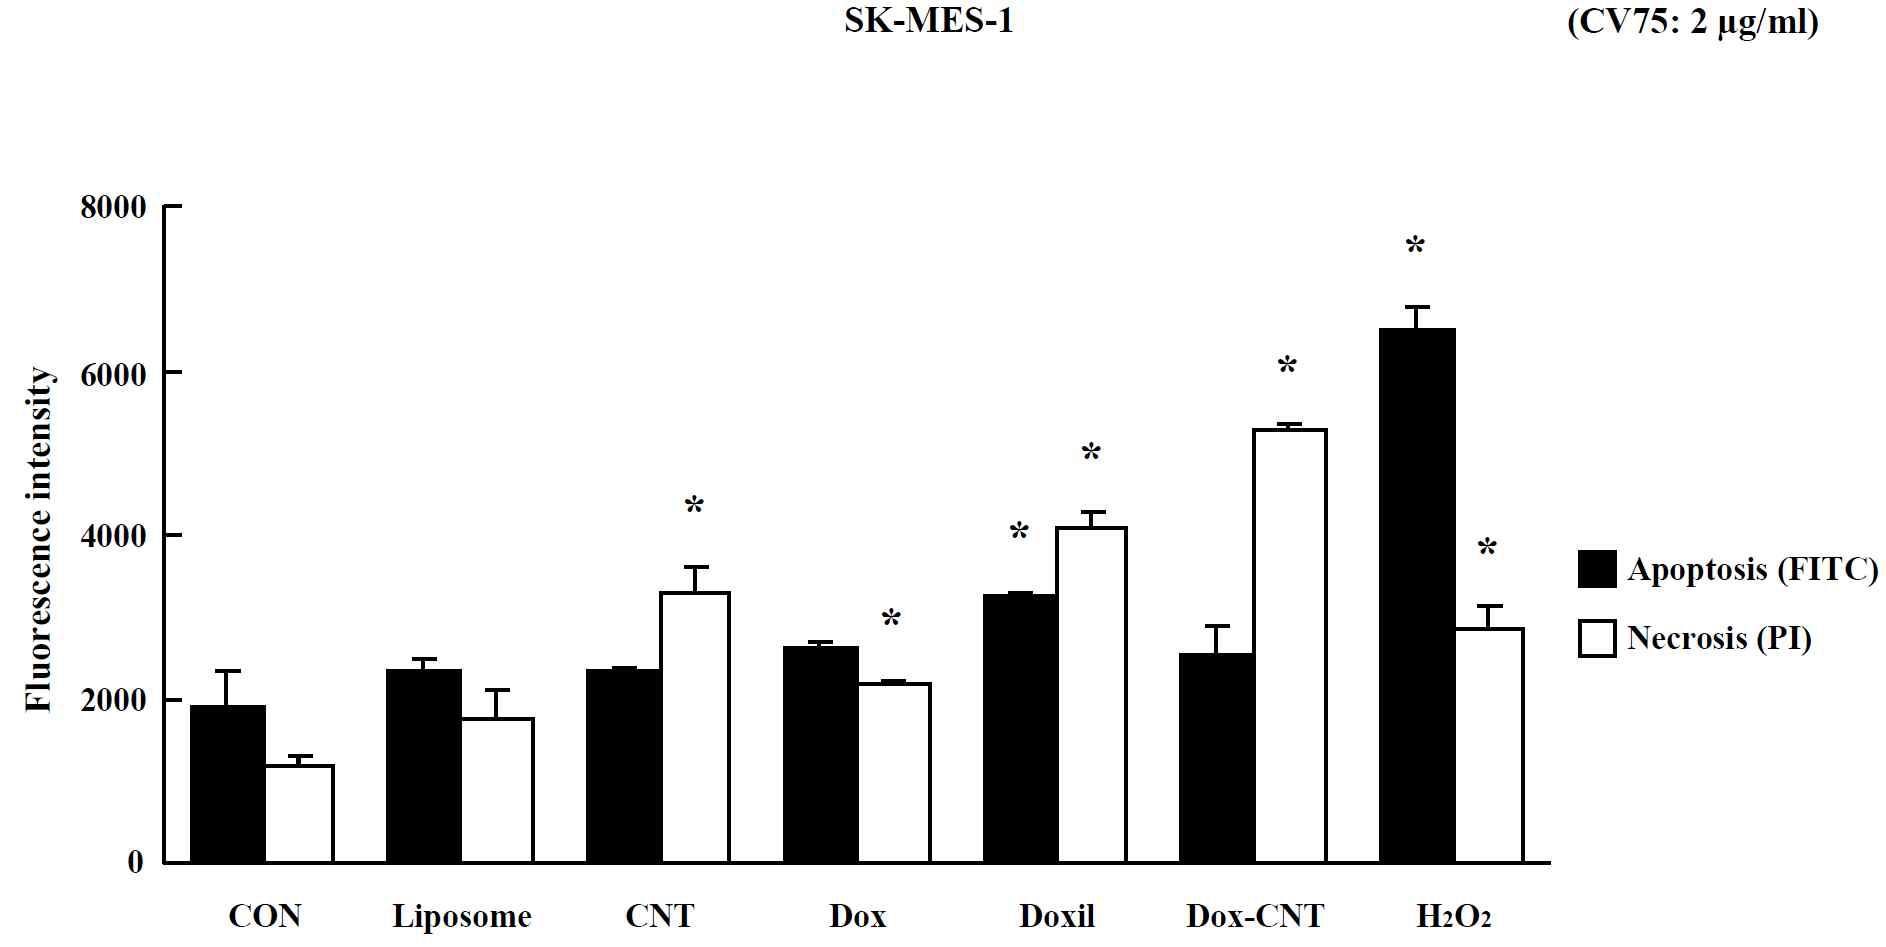 Effects of nano-anticancer drugs in the apoptosis & necrosis of SK-MES-1. Cells were exposed to 2 μg/ml and analyzed by Annexin V-FITC/PI staining. Data are shown as means ± SE (n = 5). * p<0.05, significantly different from the control.